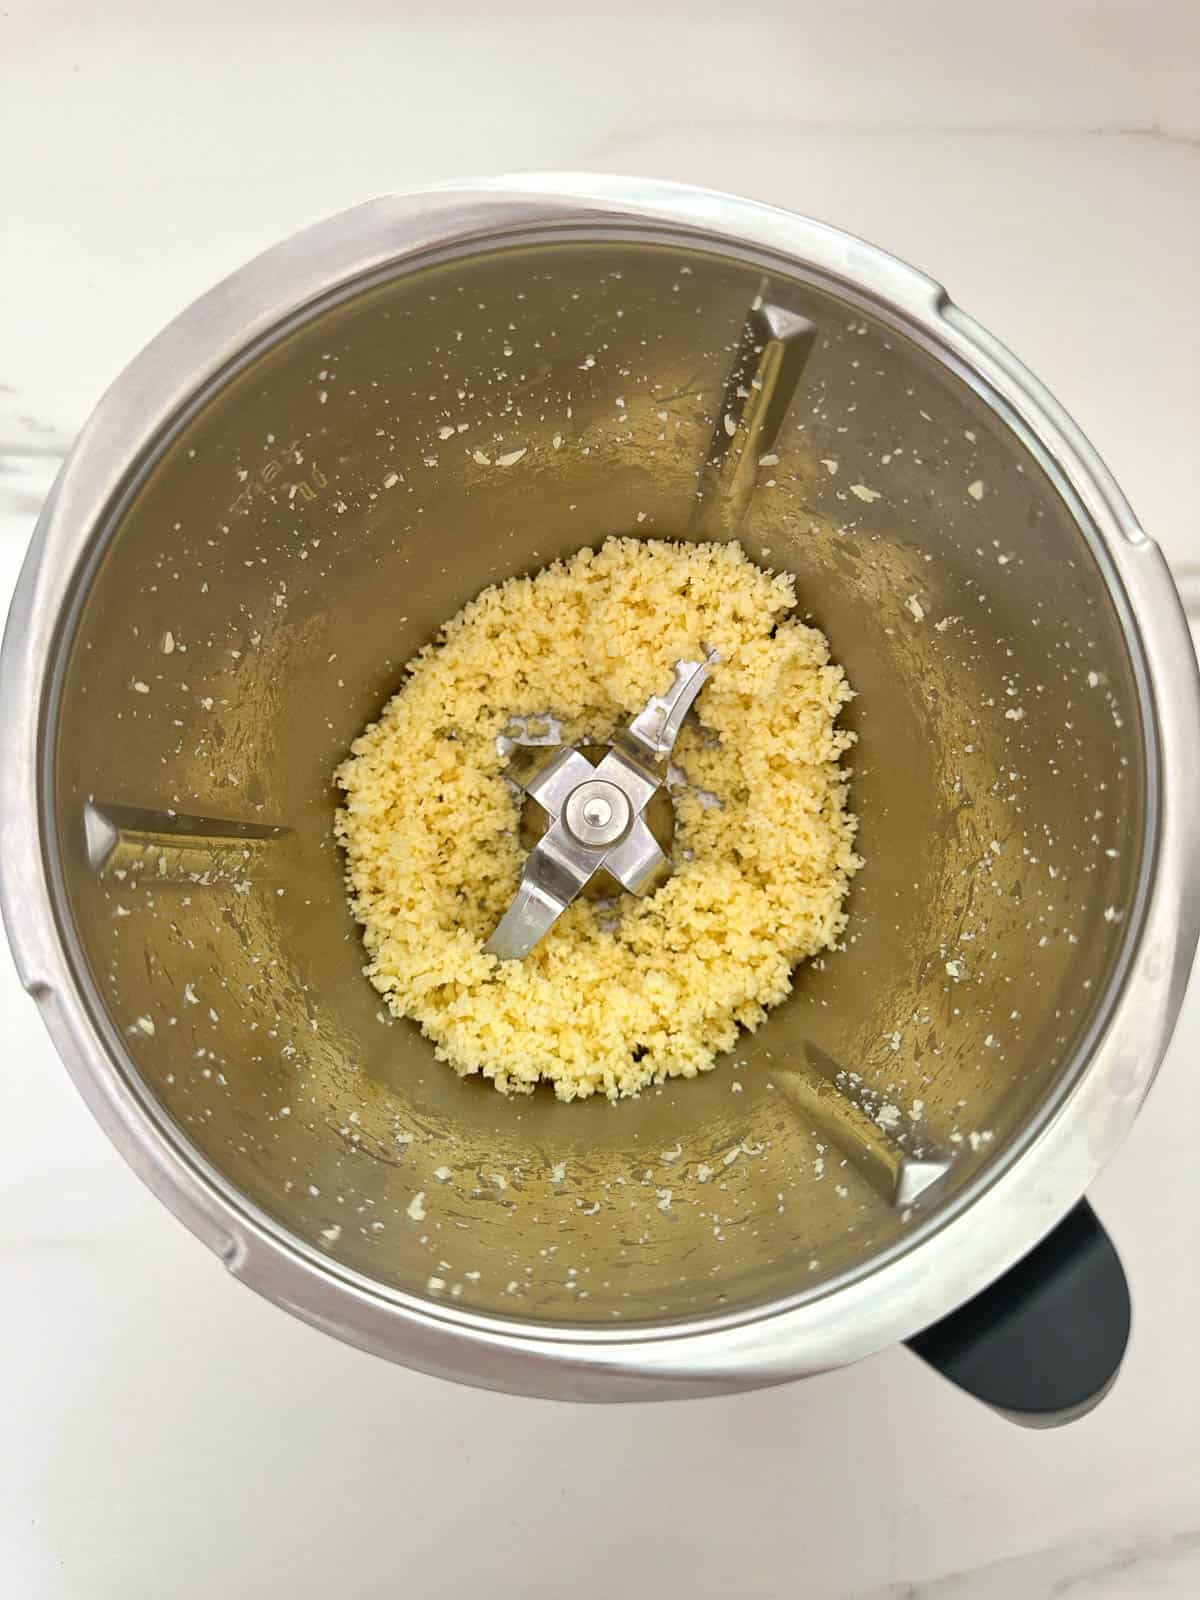 Grated cheese in Thermomix bowl.